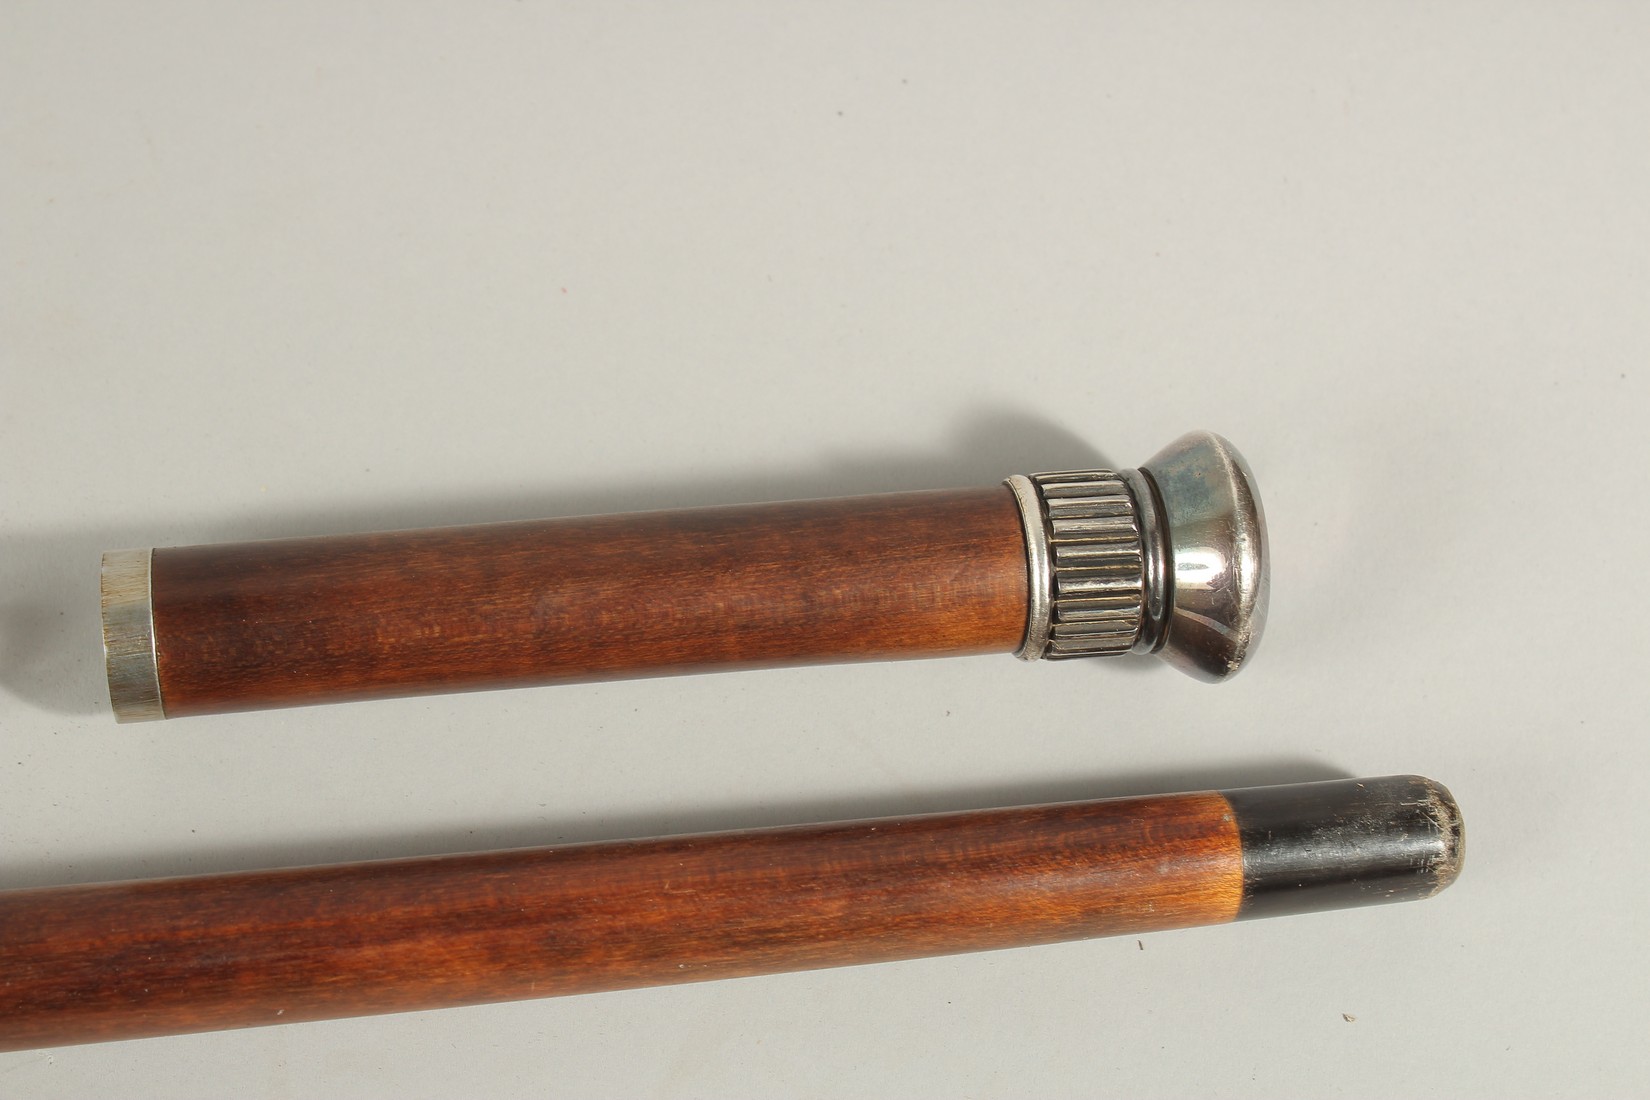 A RARE 19TH CENTURY WALKING STICK with metal top and two screw off sections revealing a long glass - Image 3 of 7